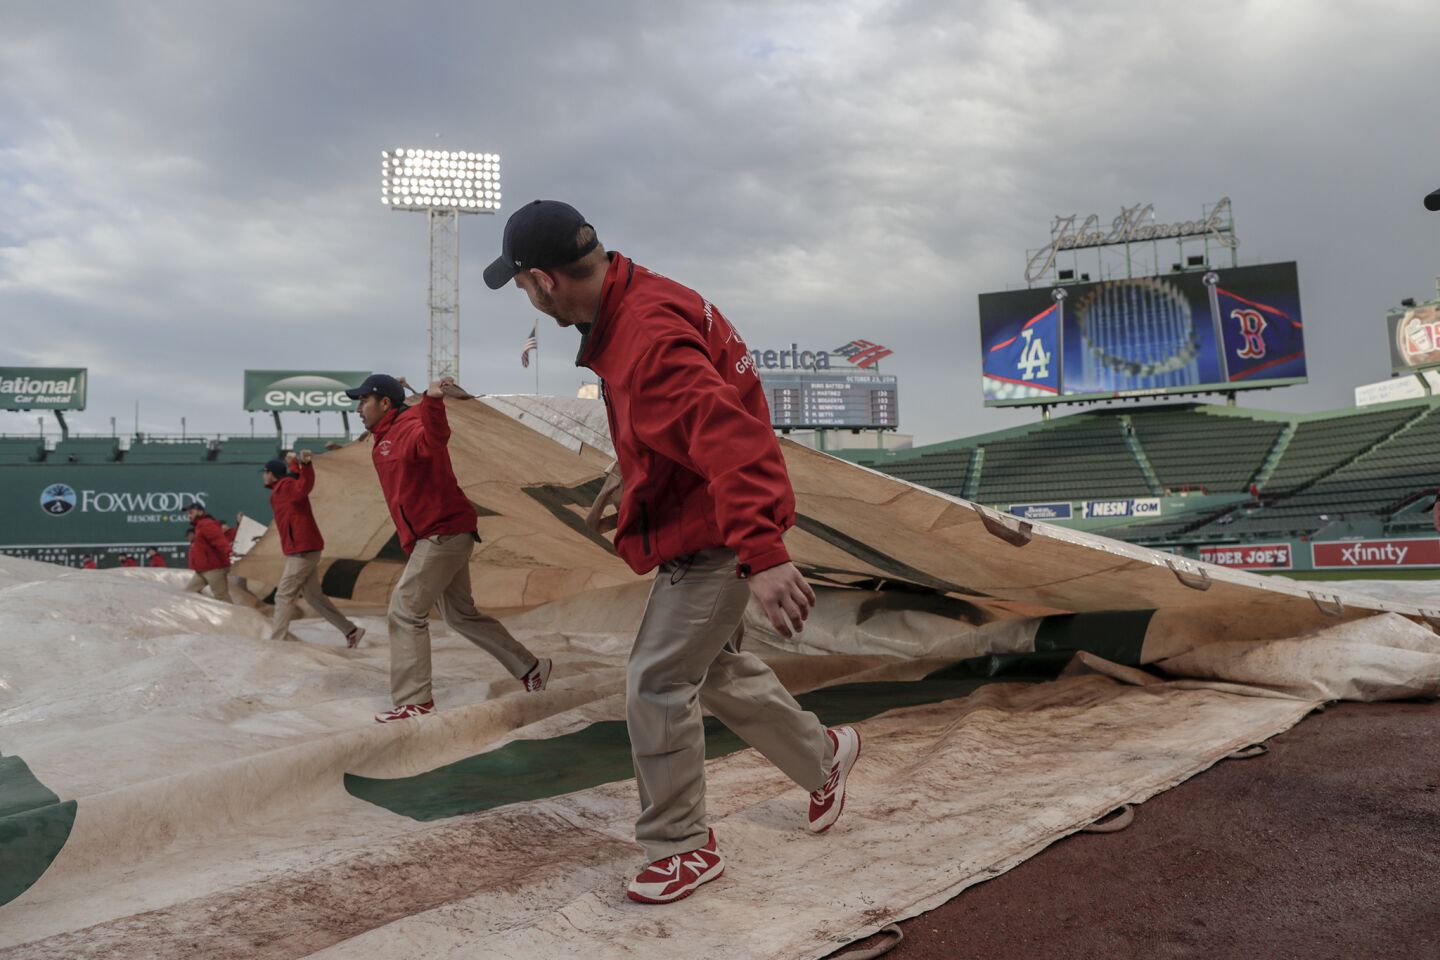 Fenway Park grounds crew members pull a tarp off the field soon after a heavy rainstorm passed by hours before the LA Dodgers and the Boston Red Sox play game one of the 2018 Word Series at Fenway Park.